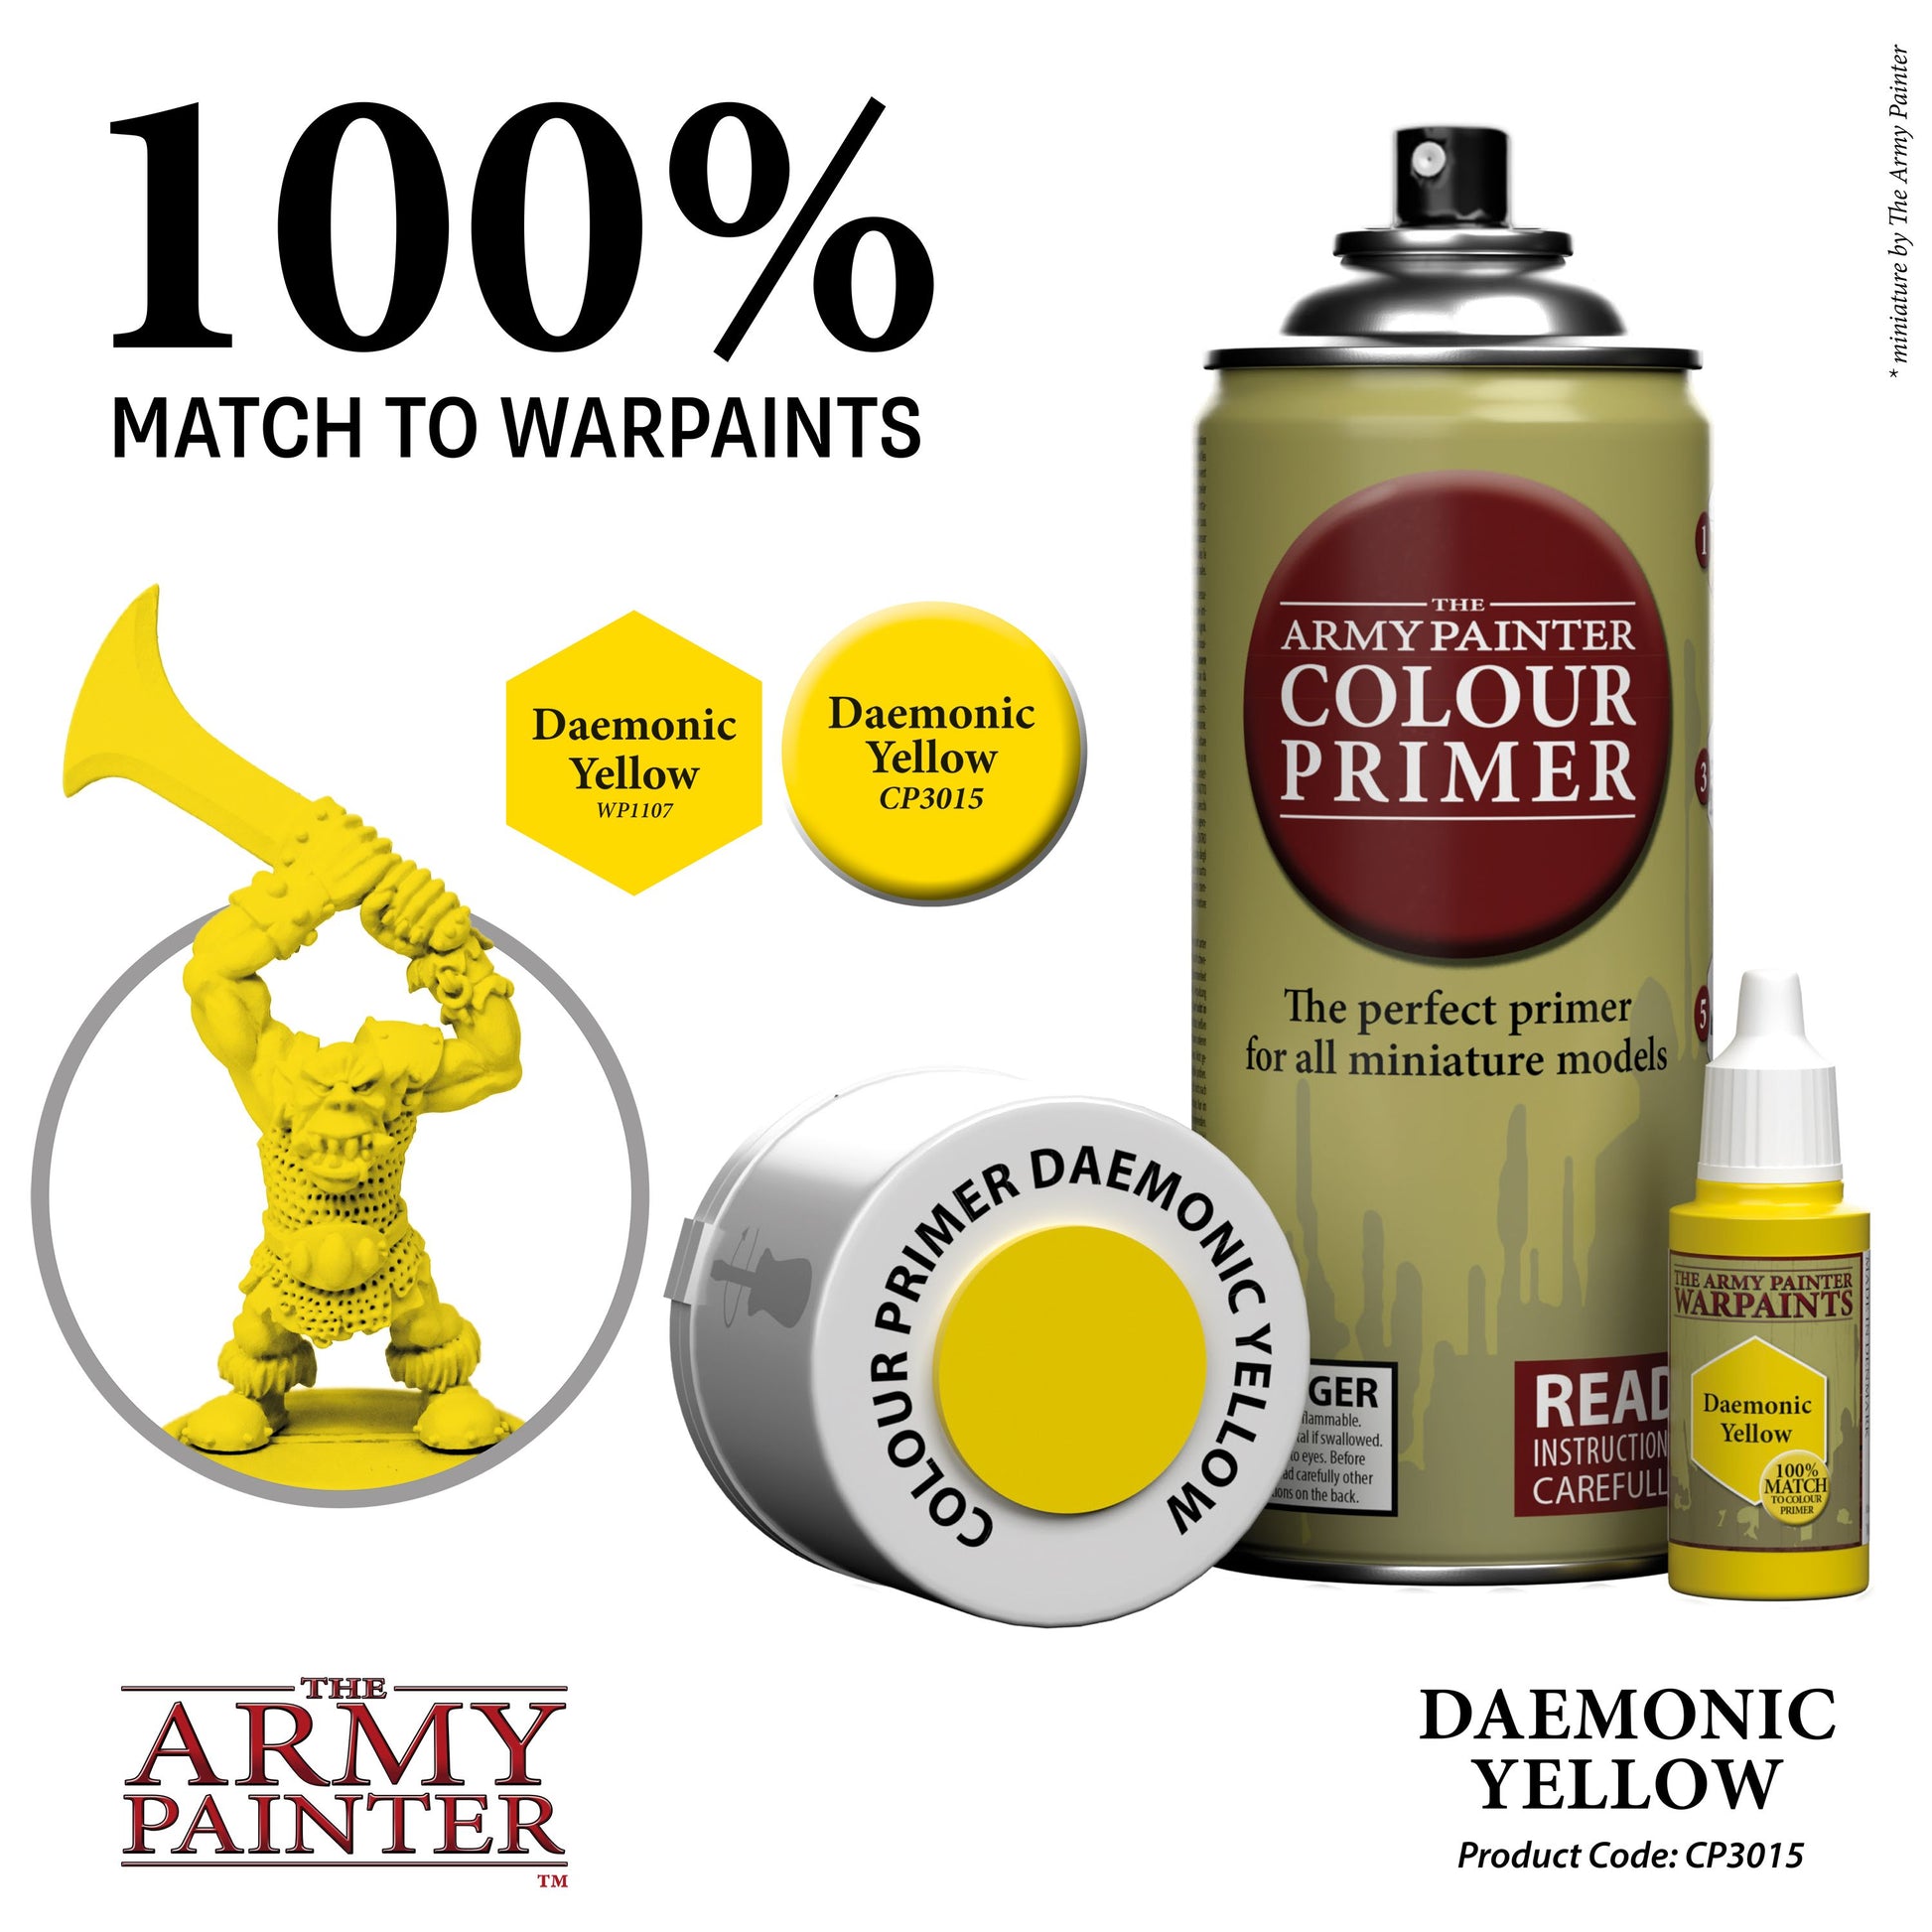 The Army Painter - Colour Primer: Daemonic Yellow